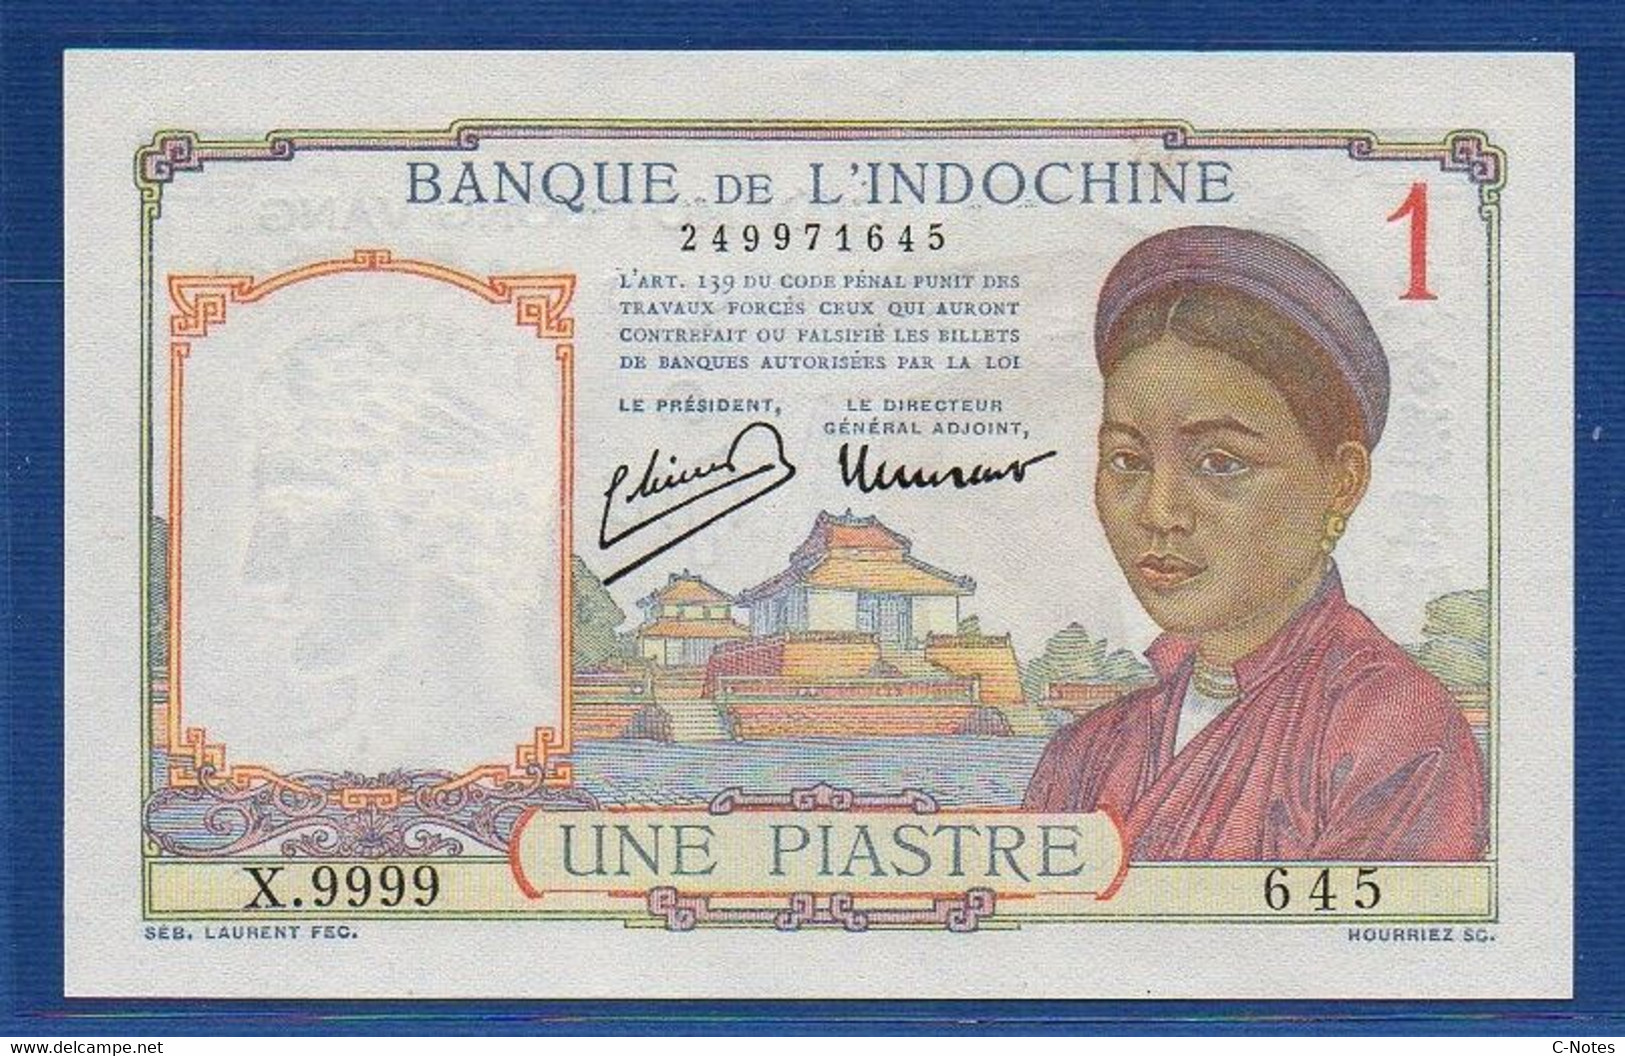 FRENCH INDOCHINA - P. 54e –  1 Piastre ND (1949) UNC-, S/n X.9999 645  Nice Serial - Indochina